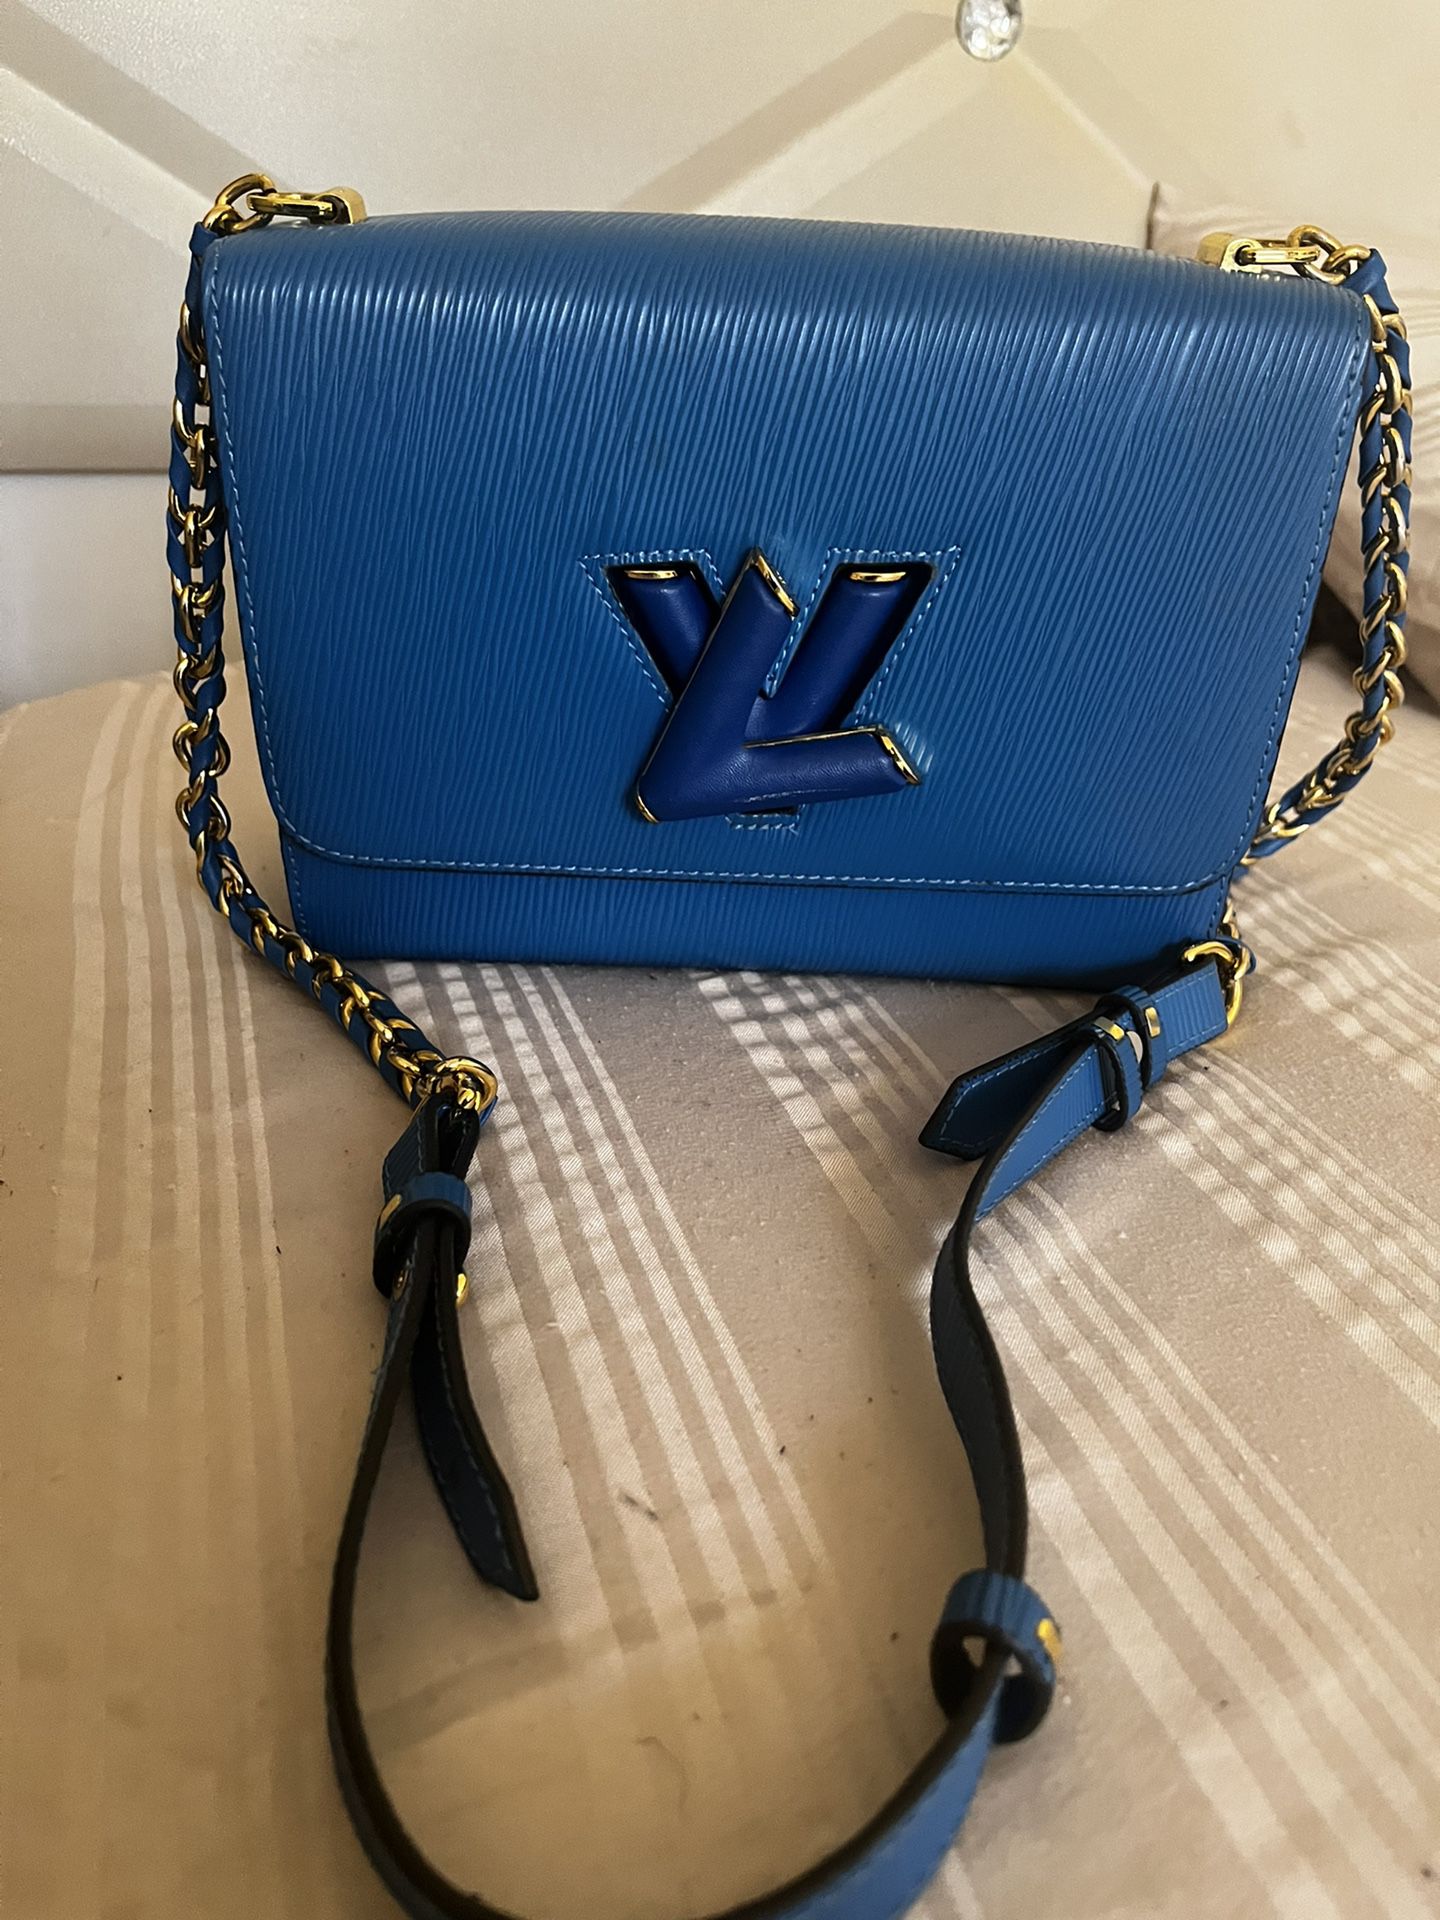 Luis Vuitton Lock for Sale in Queens, NY - OfferUp